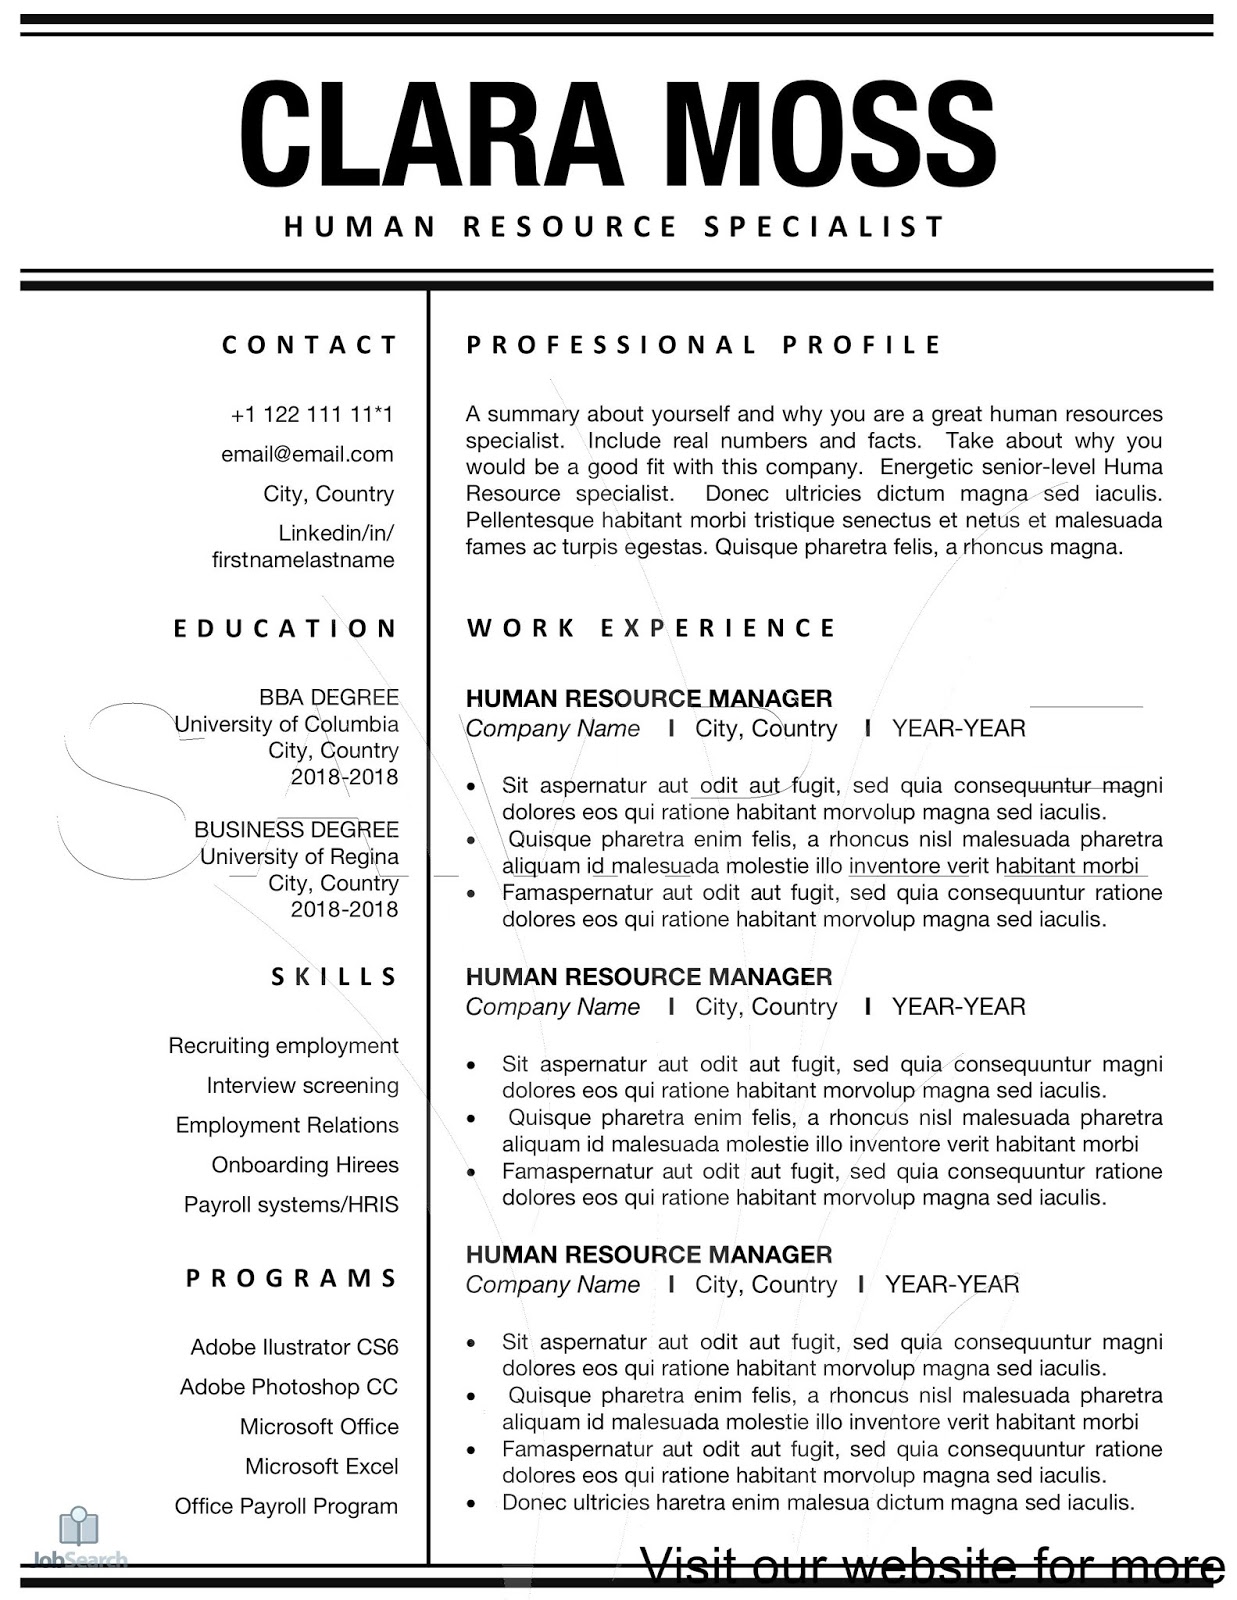 resume for human resources resume for human resources job resume for human resources manager resume for human resources generalist